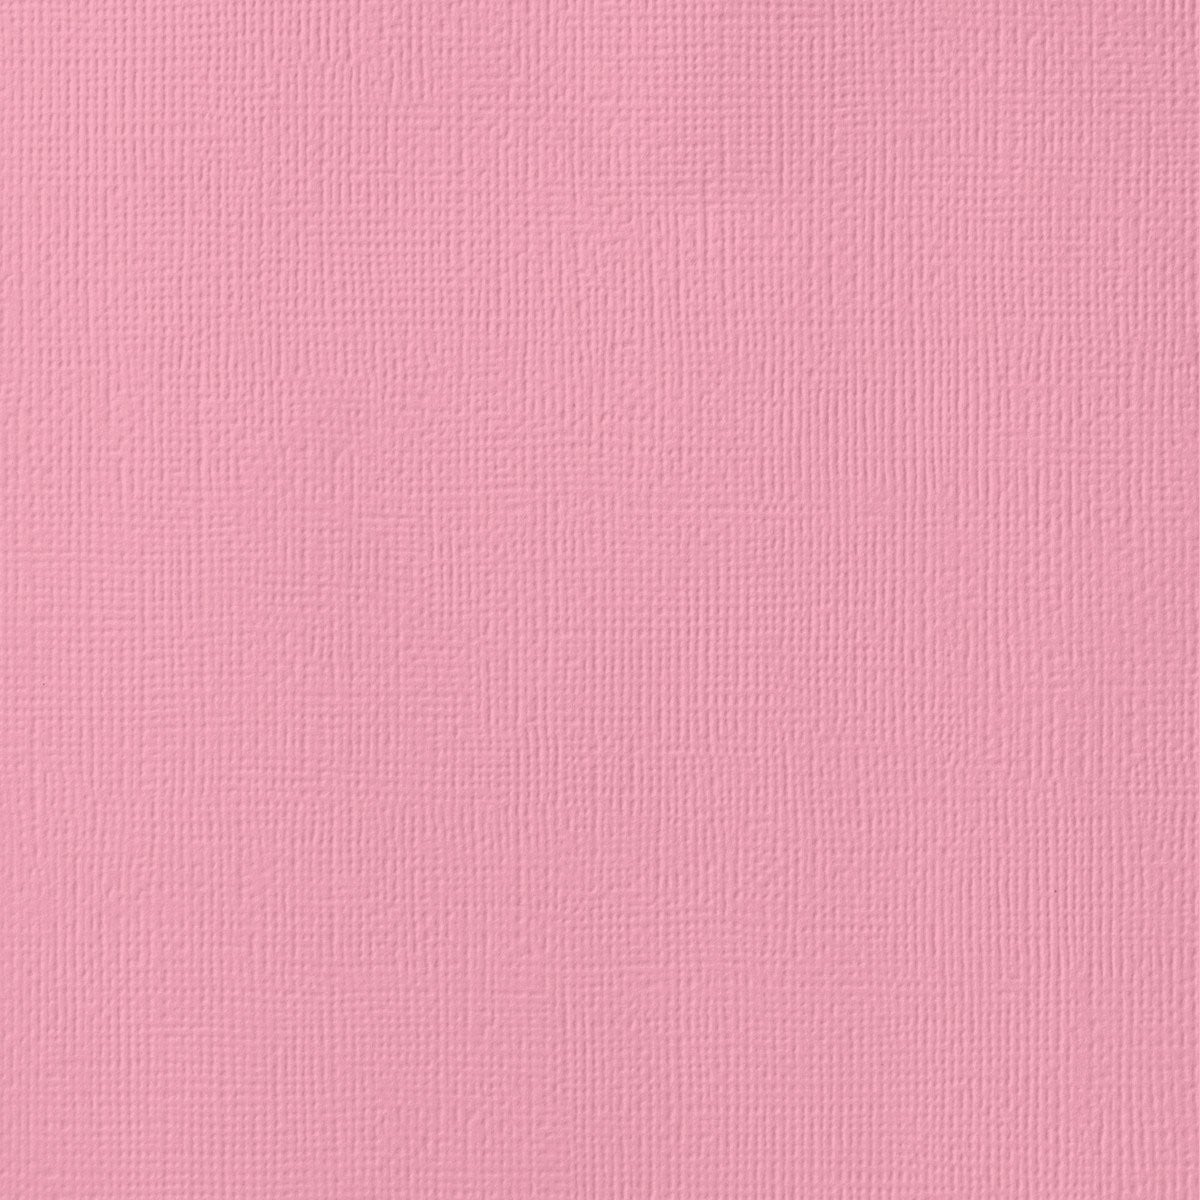 LUXPaper 8.5” x 11” Cardstock for Crafts and Cards in 100 lb. Candy Pink,  Scrapbook Supplies, 50 Pack (Pink) : : Office Products